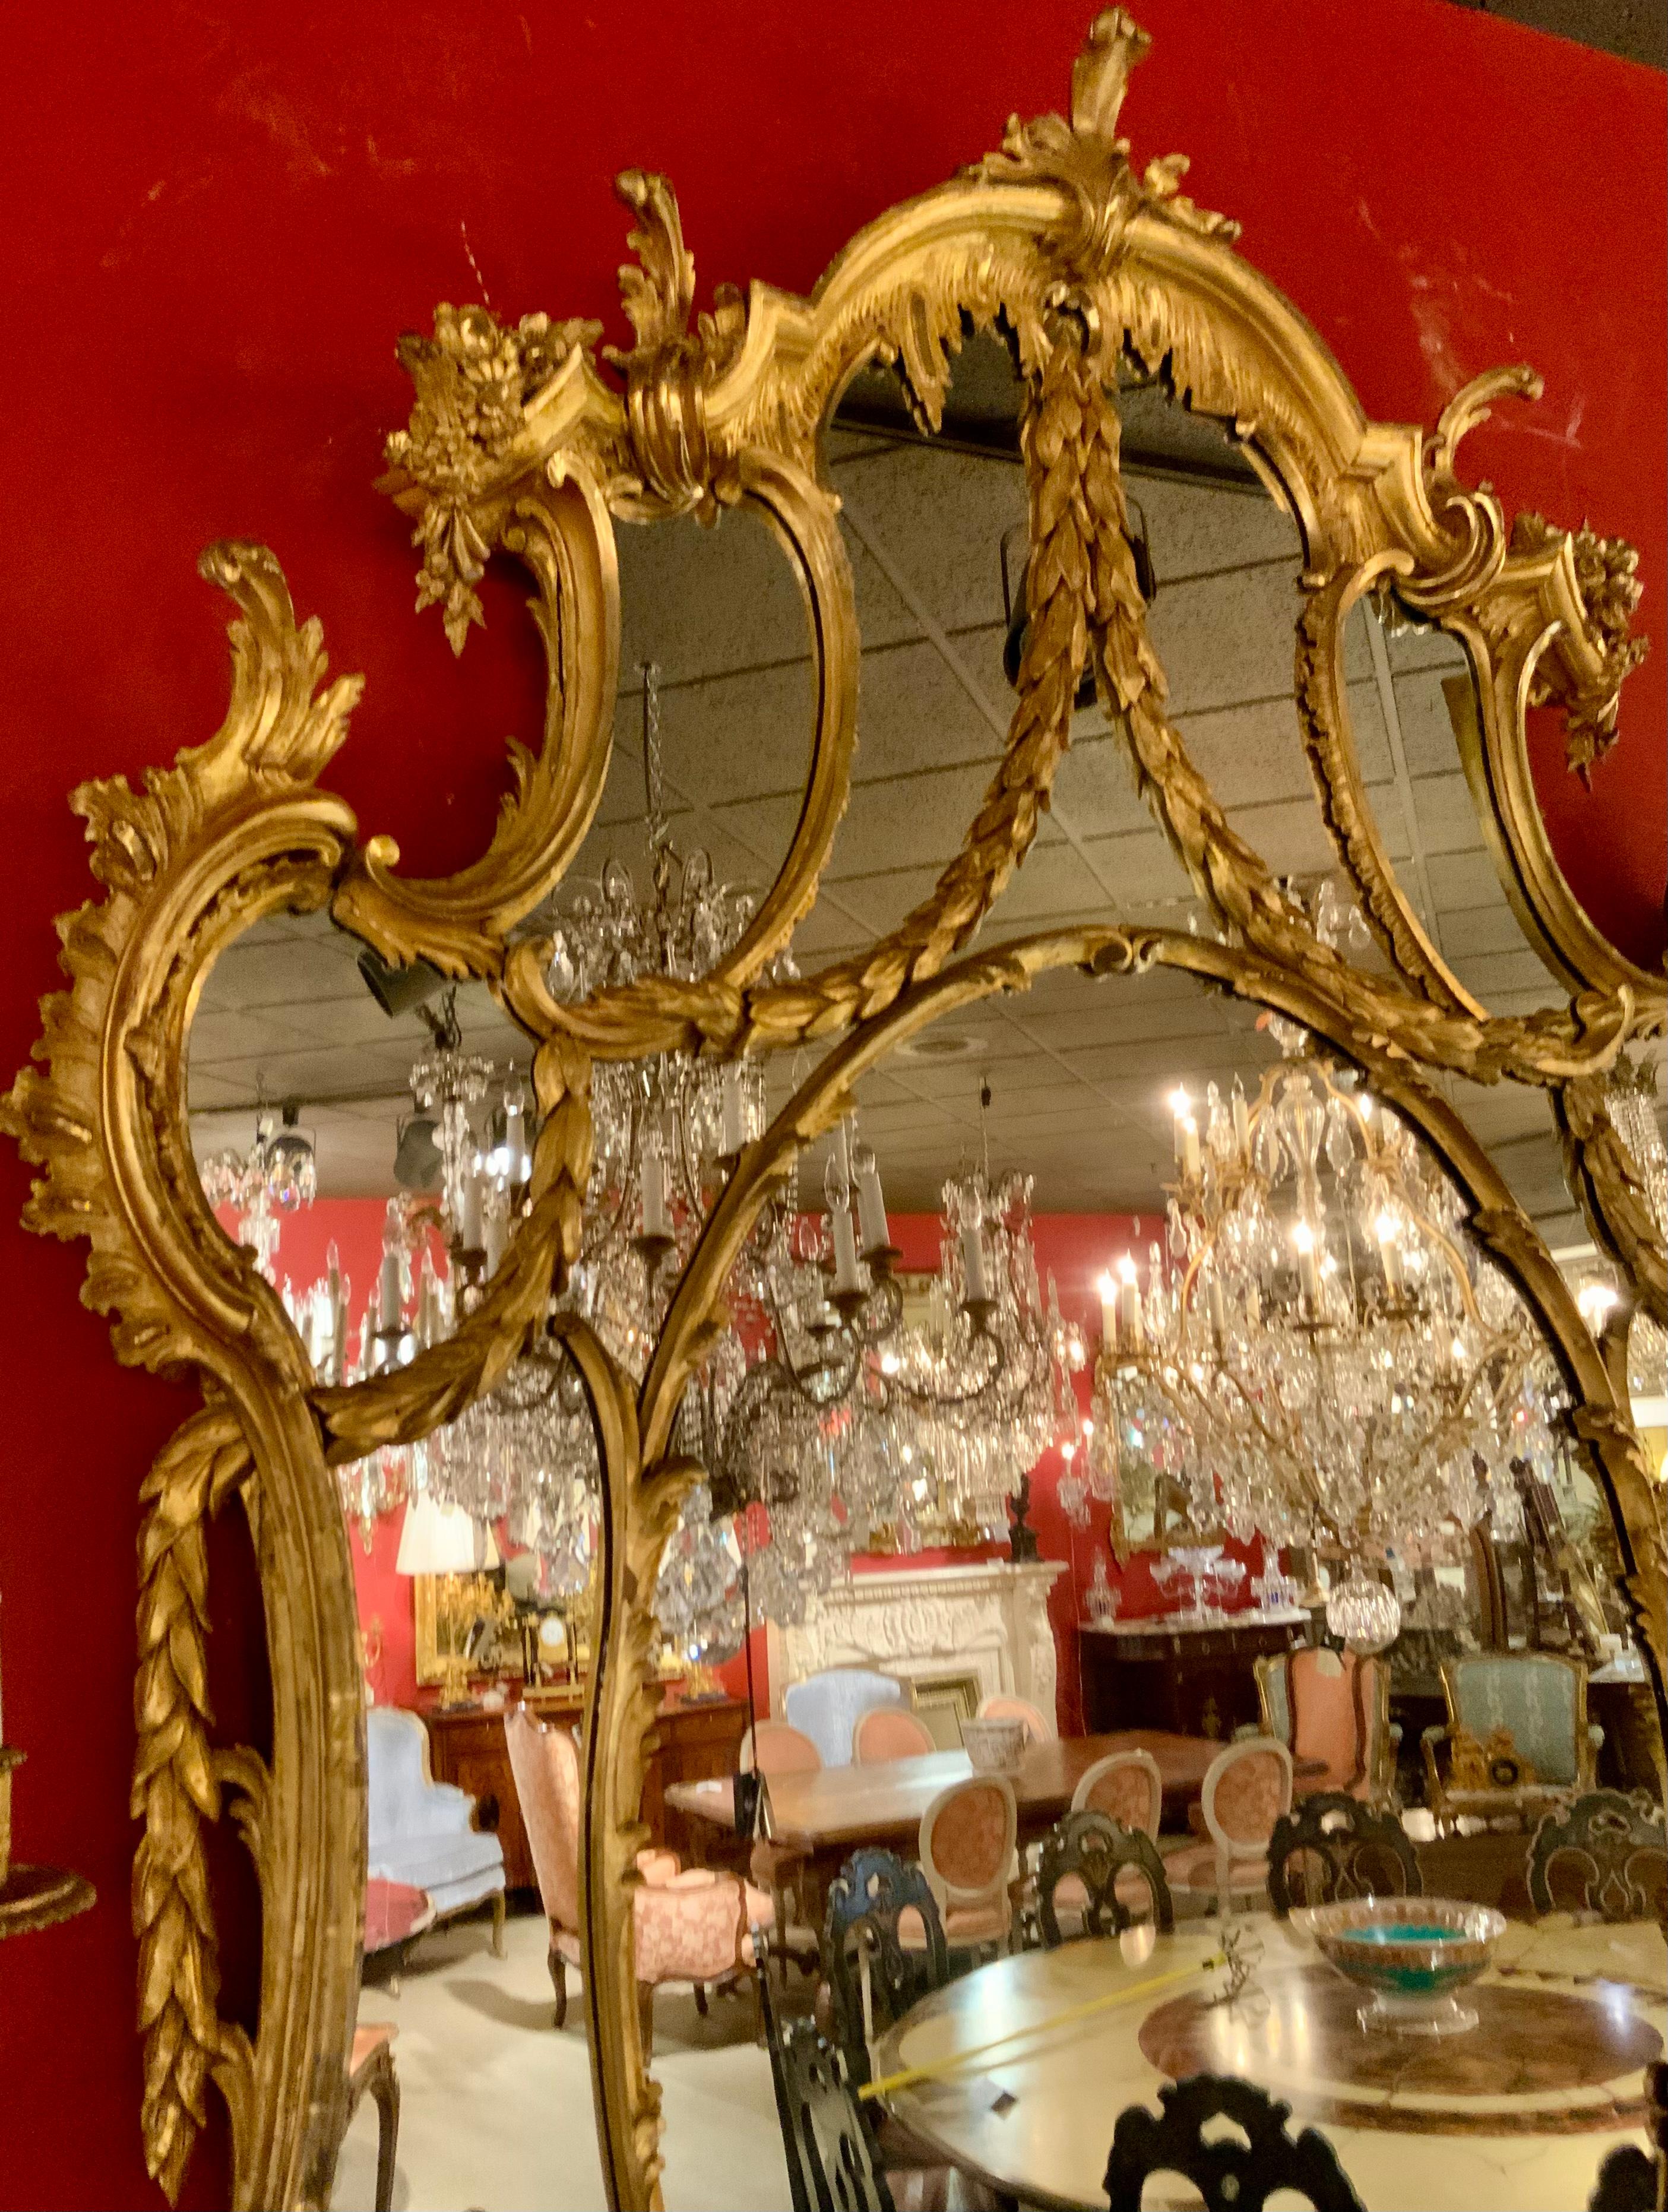 This monumental George III-Style Chinese Chippendale mirror
Is unique because the size and quality are rare. It has a fanned
Foliate crest, over shaped frame with scrolled foliate molding
And floral designs, encasing flat mirror plate. The